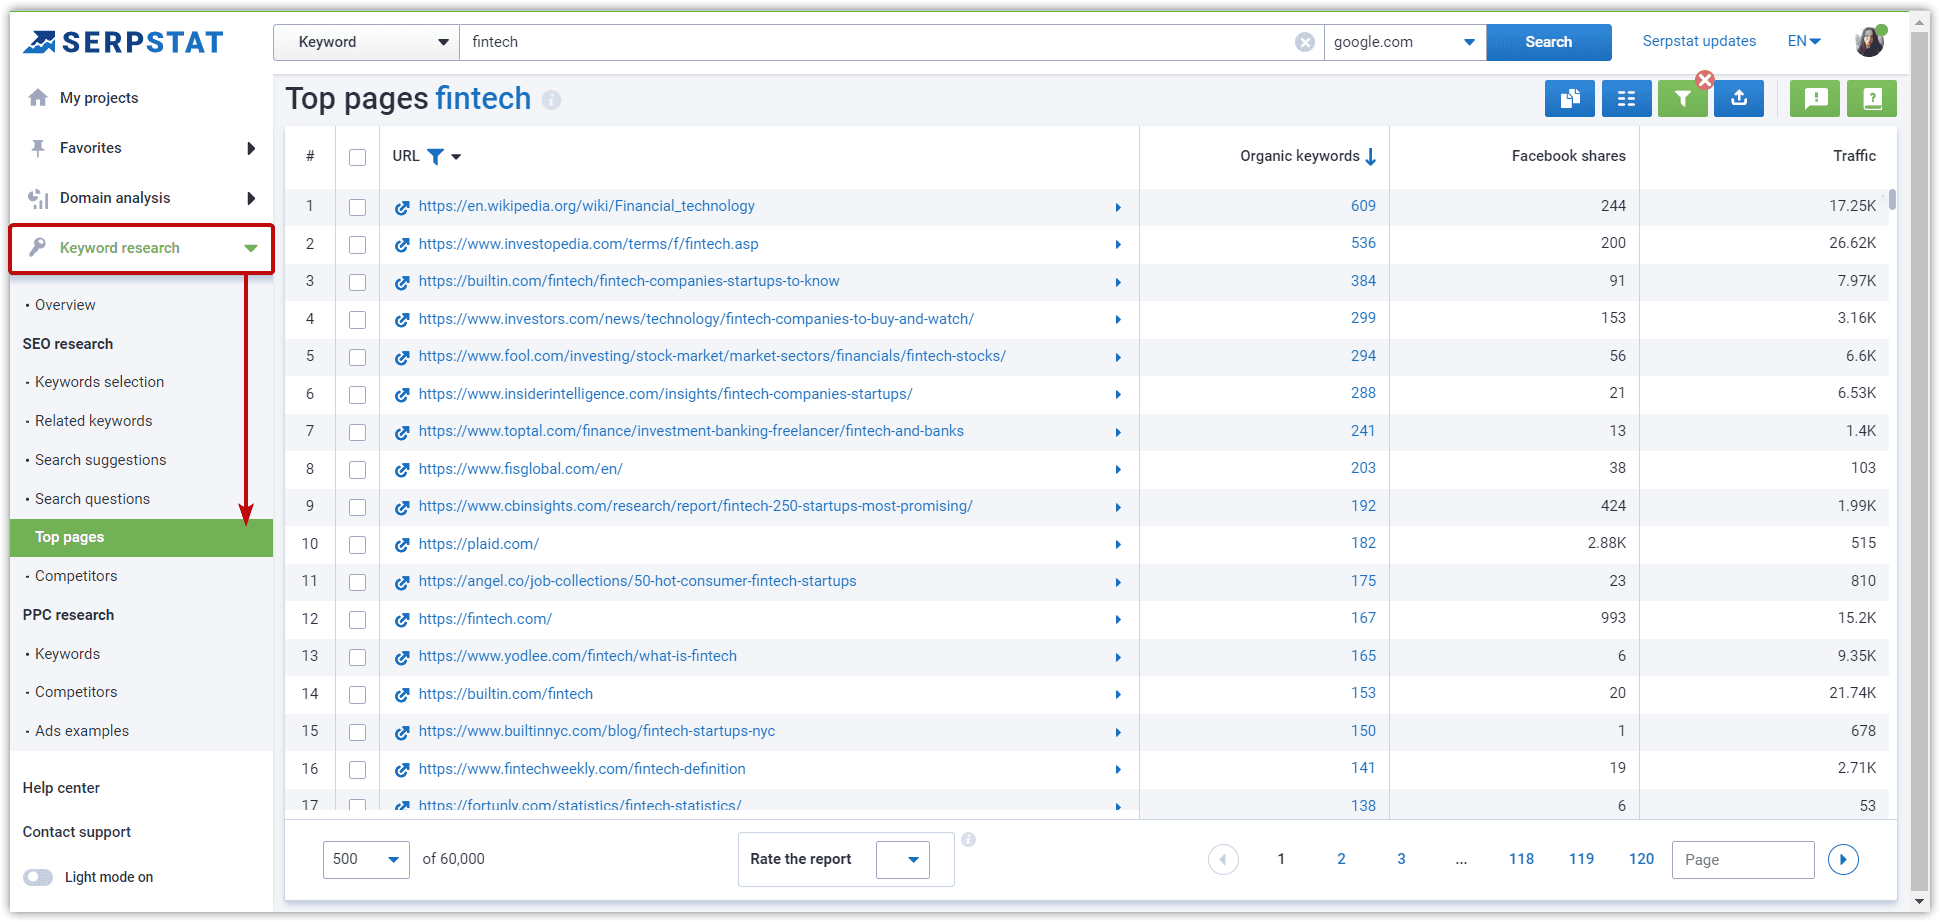 Top pages by keywords